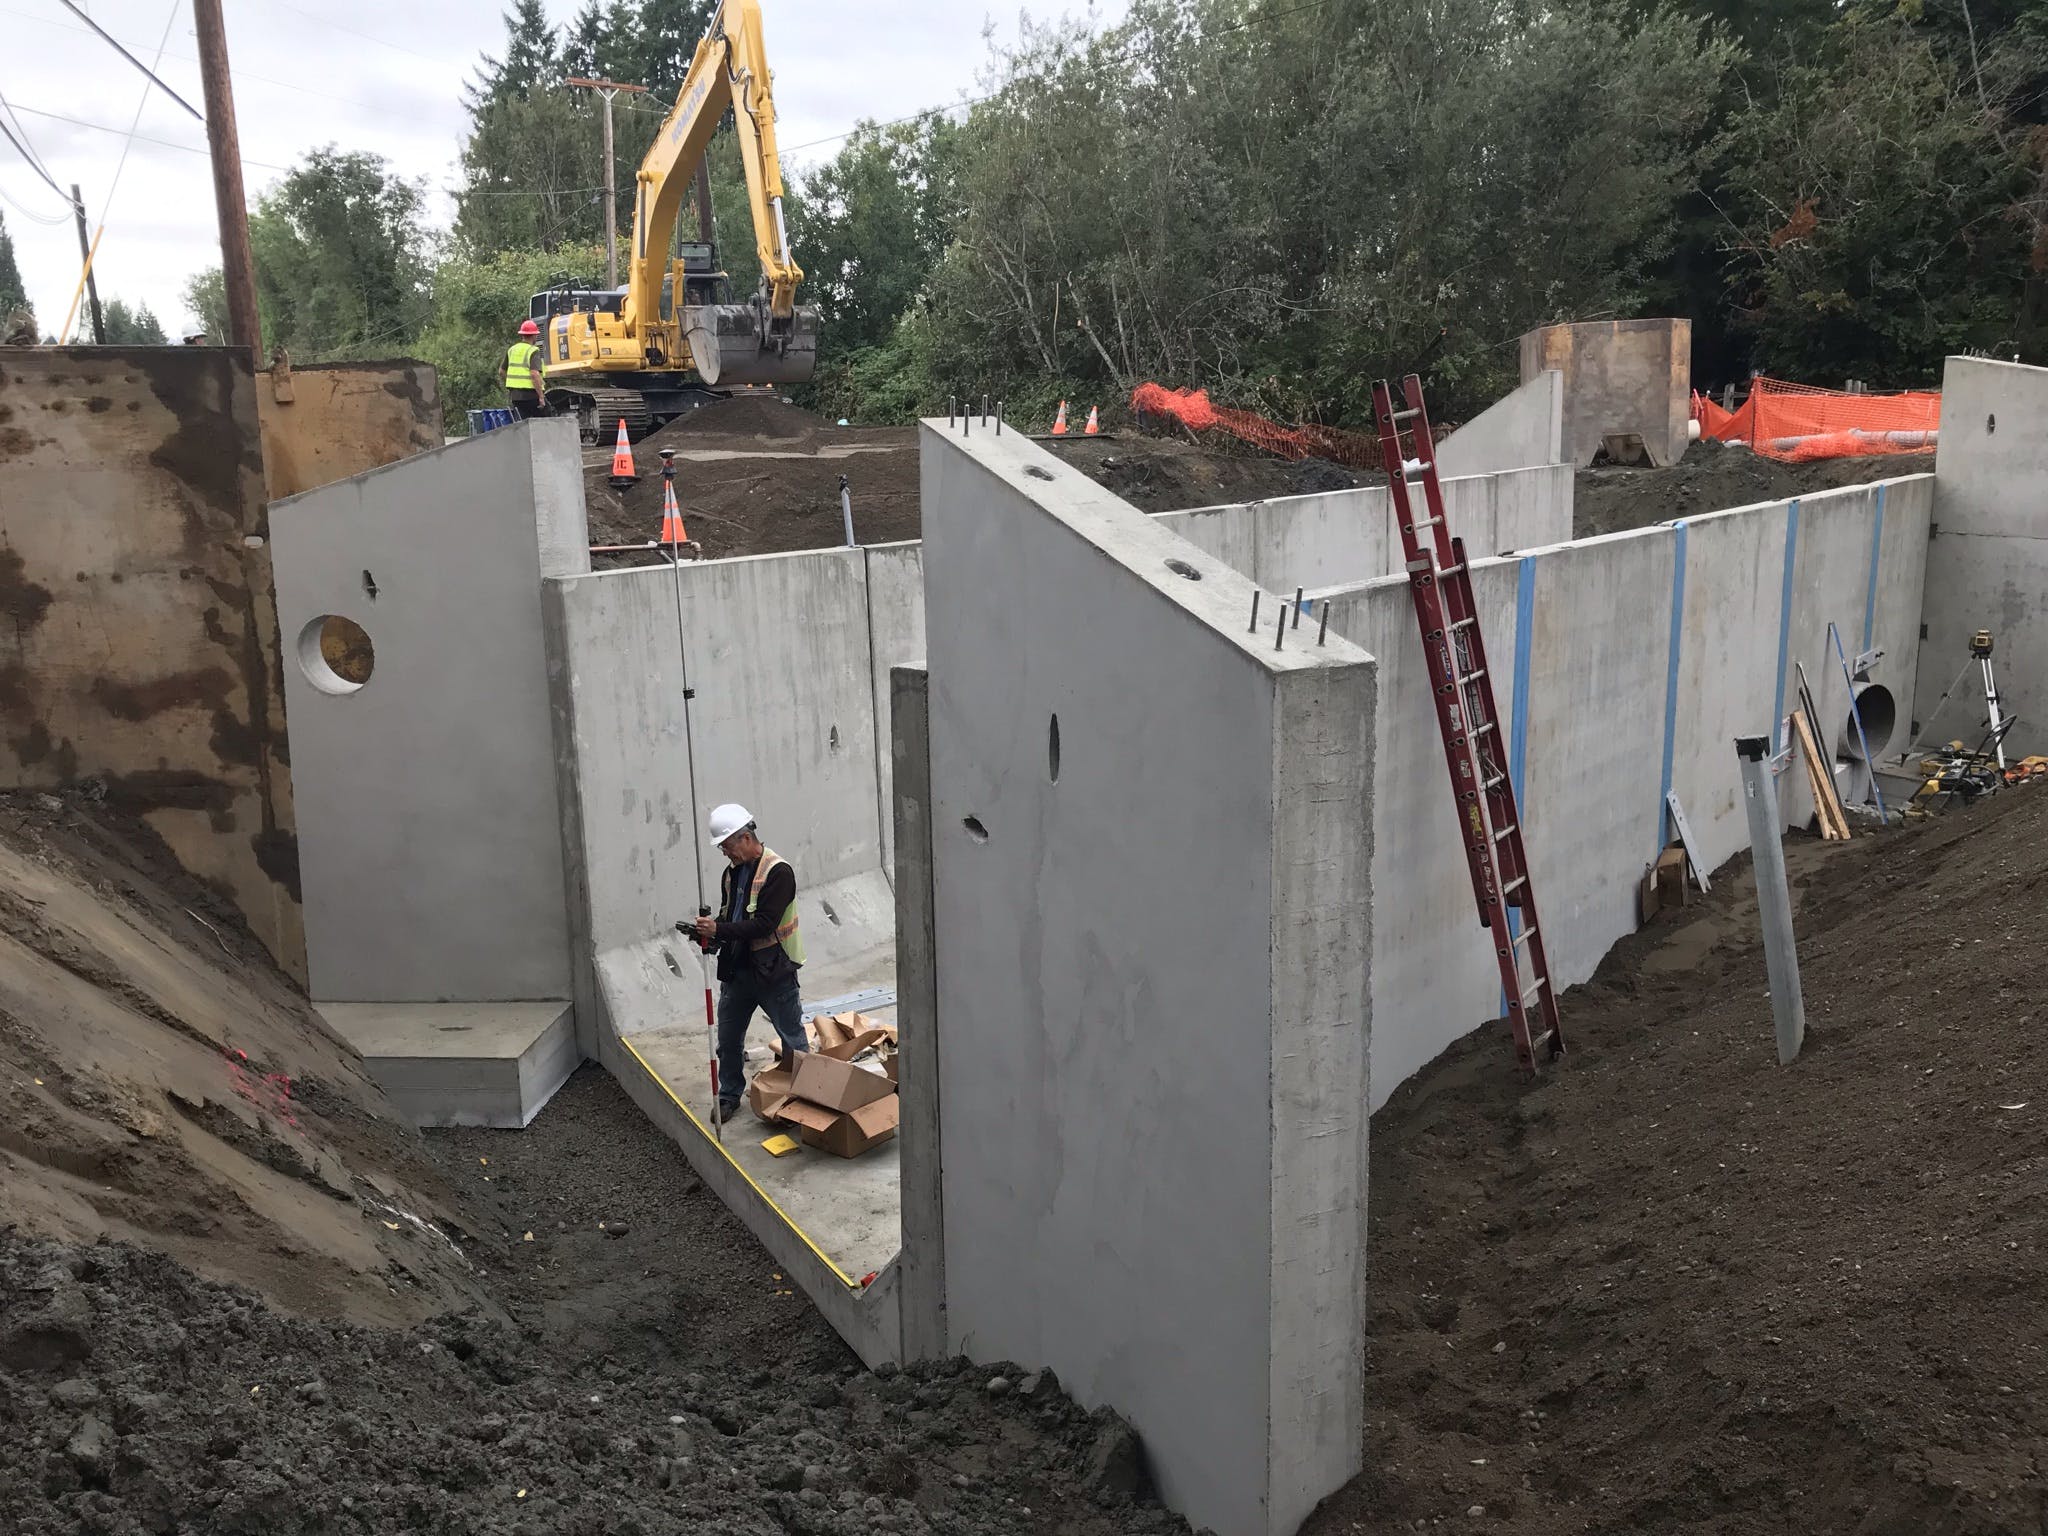 Upstream culvert wing walls installed for the Ebright Creek Fish Passage Project.